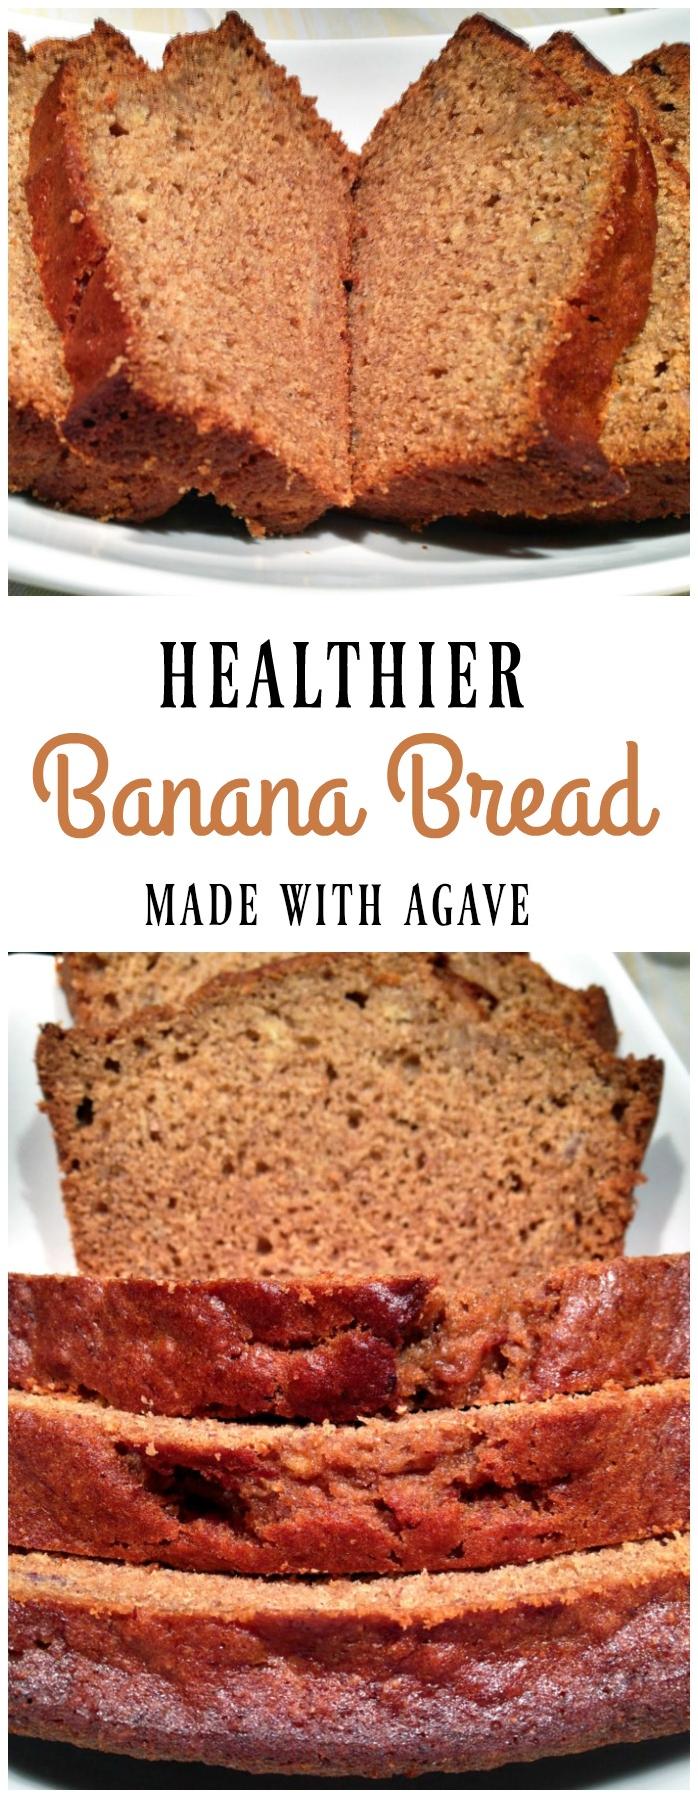  A banana bread you can indulge in guilt-free